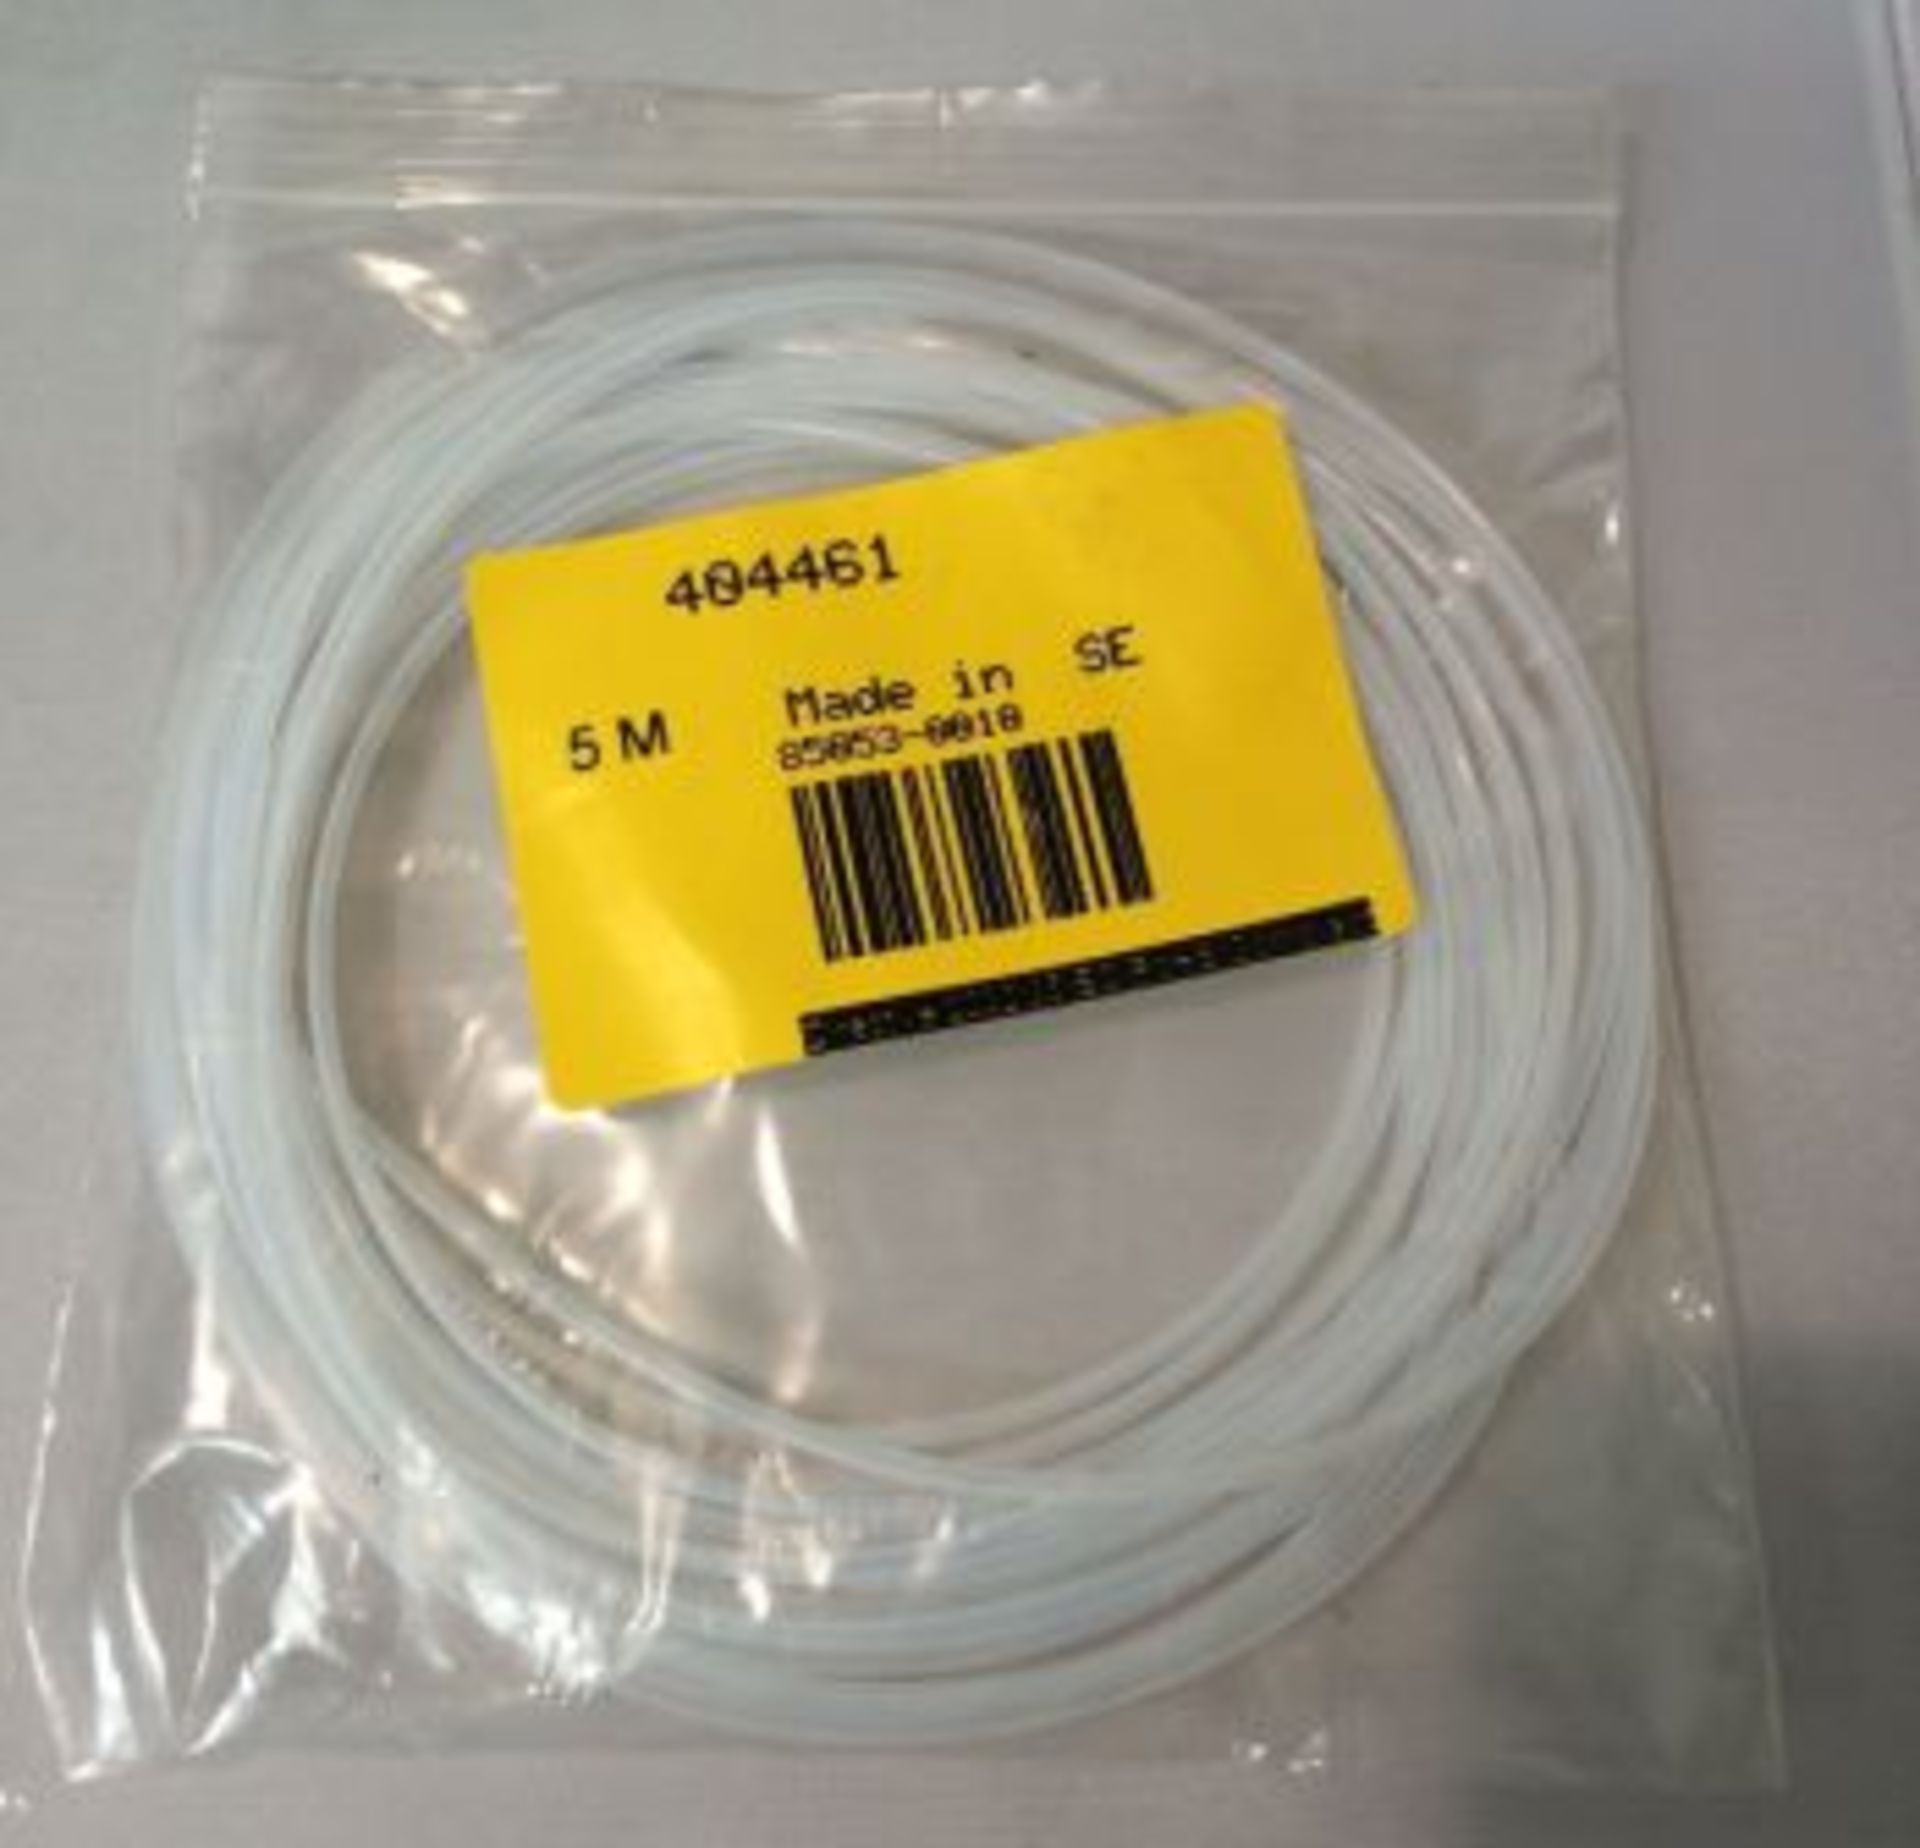 25 x 5M Packs of 1.91mm PTFE Cable Sleeve Clear